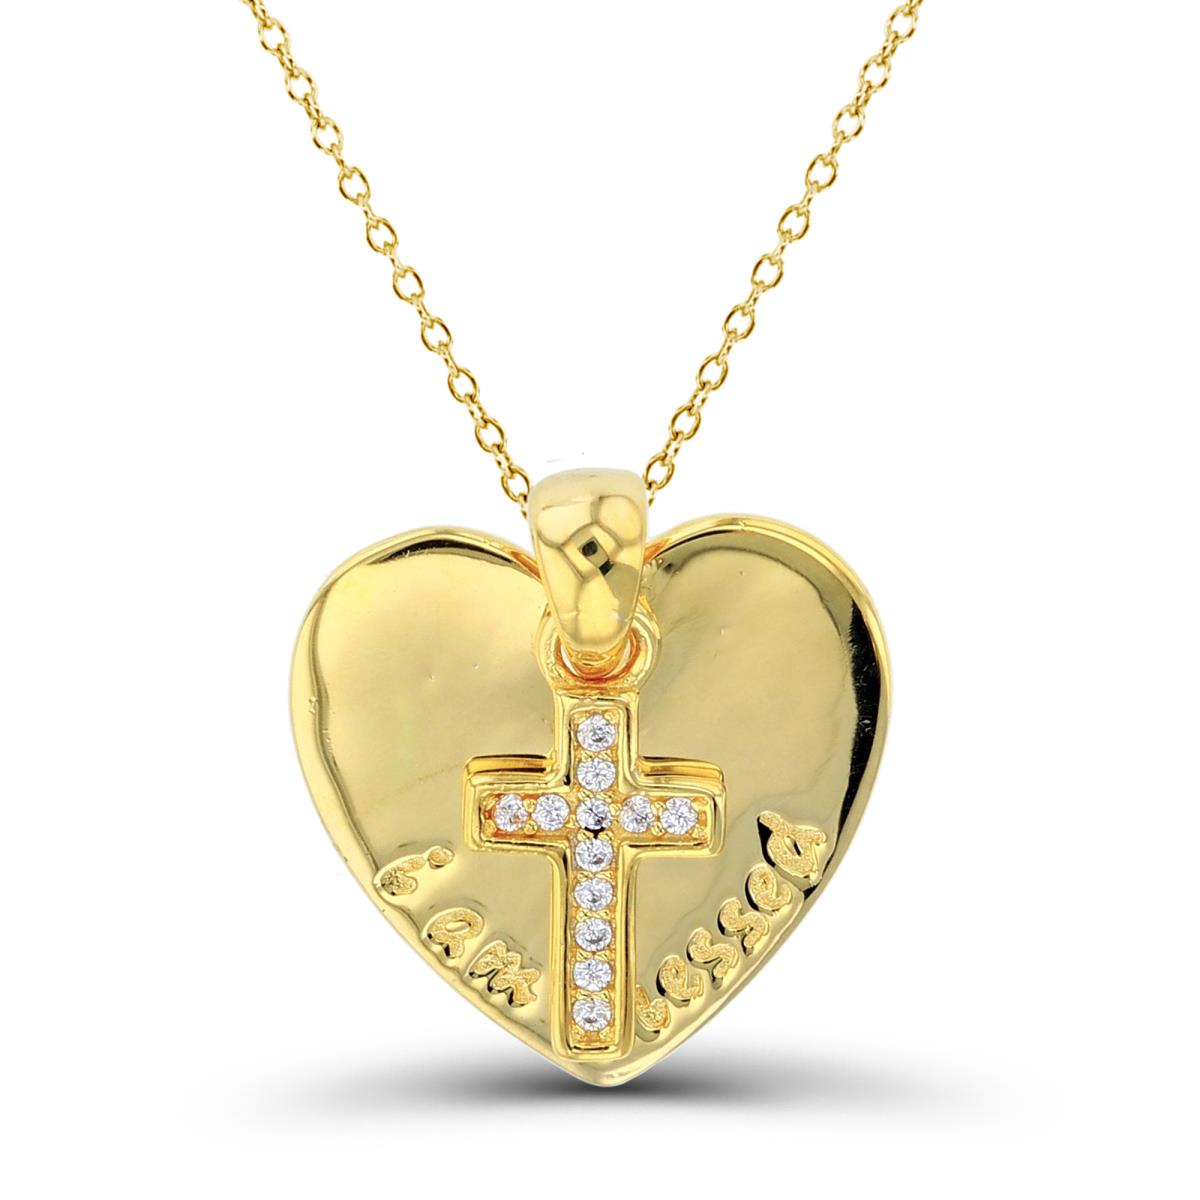 Sterling Silver+1Micron Yellow Gold Rnd White CZ Cross & "I am blessed"High Polish Heart 18"Necklace